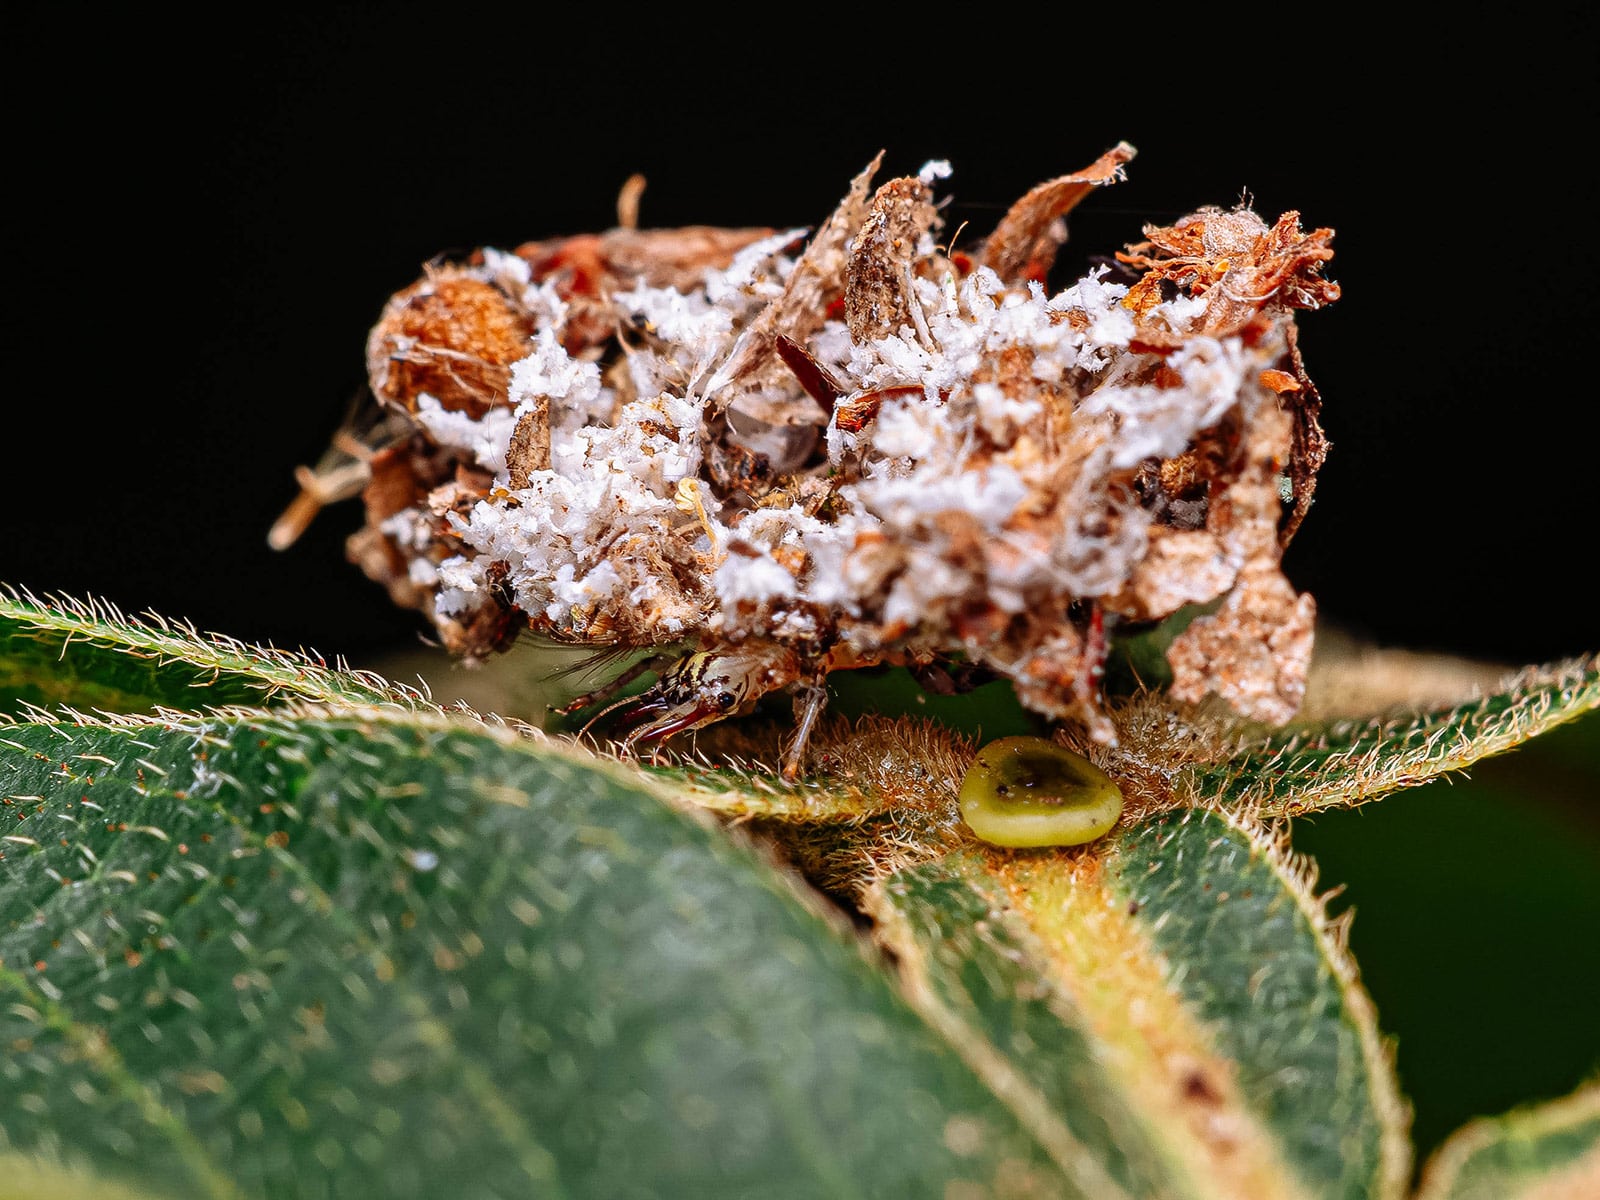 A lacewing larva carrying a huge mound of plant debris and aphid exoskeletons on its back as it moves across a leaf